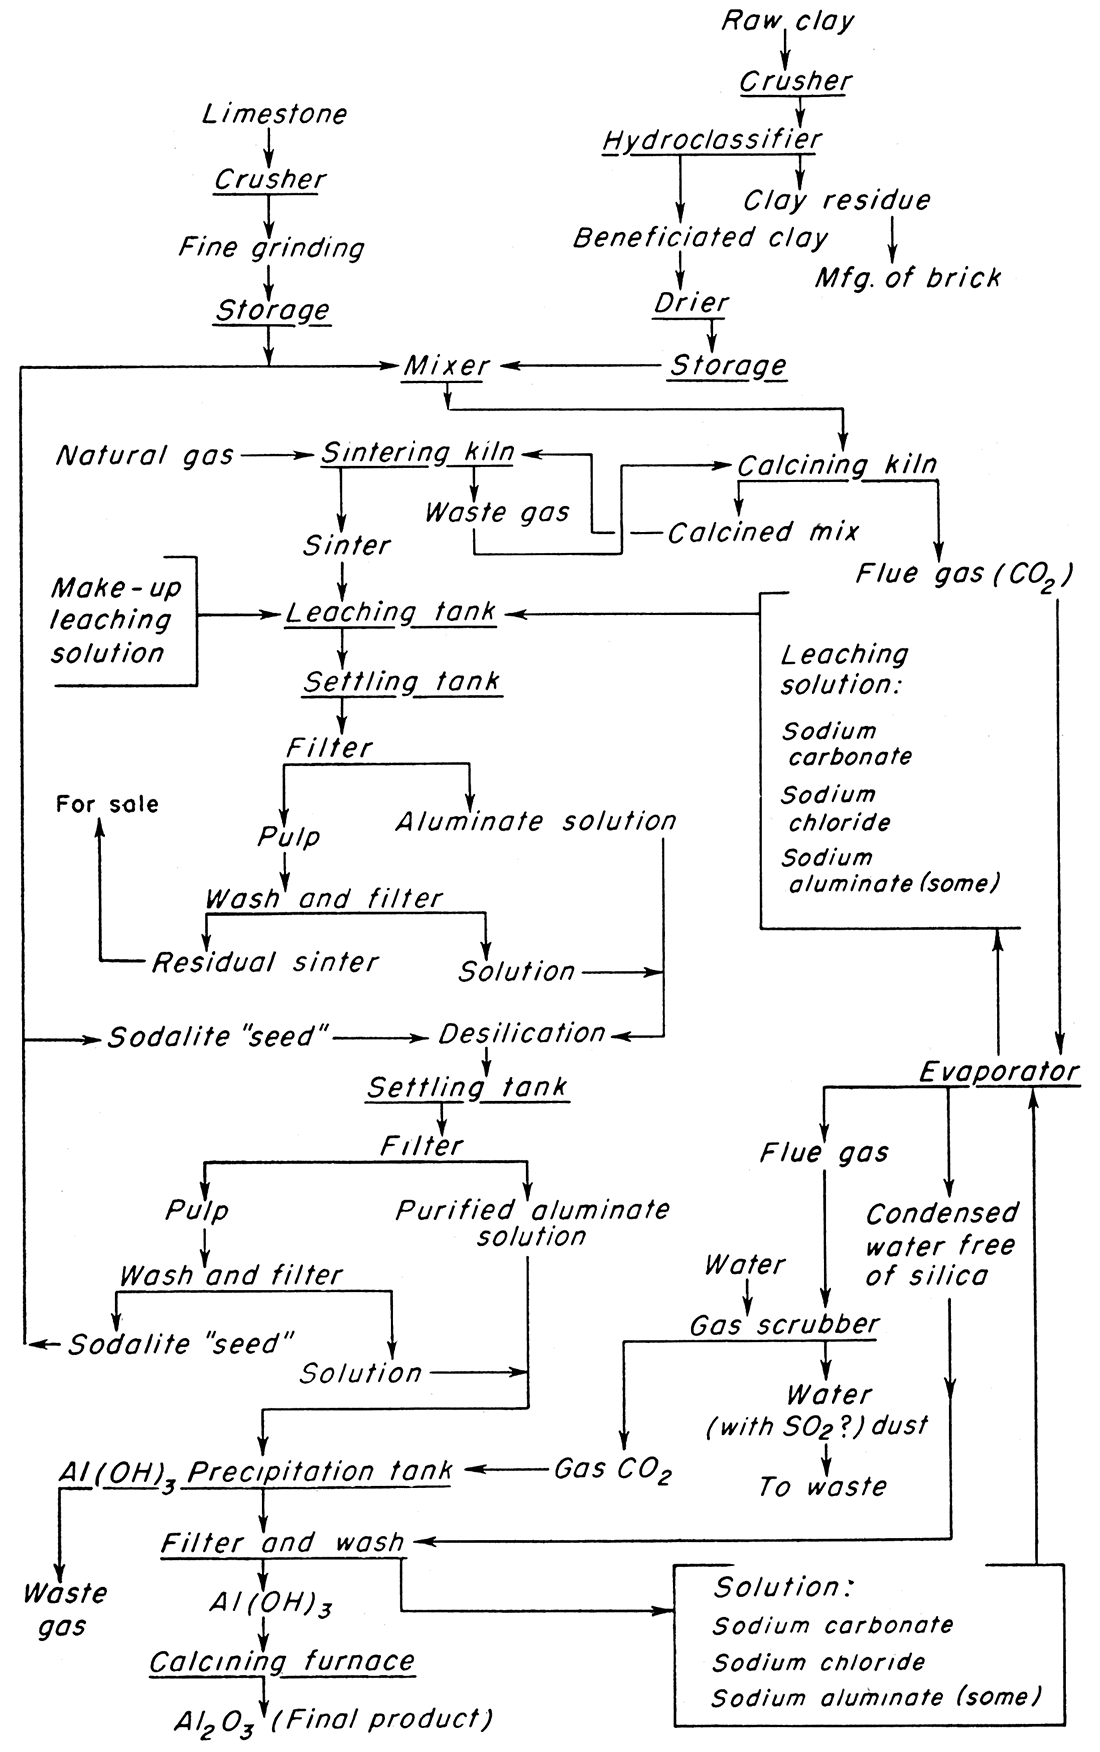 Flow sheet of lime-sinter process for extracting alumina from Kansas clay.